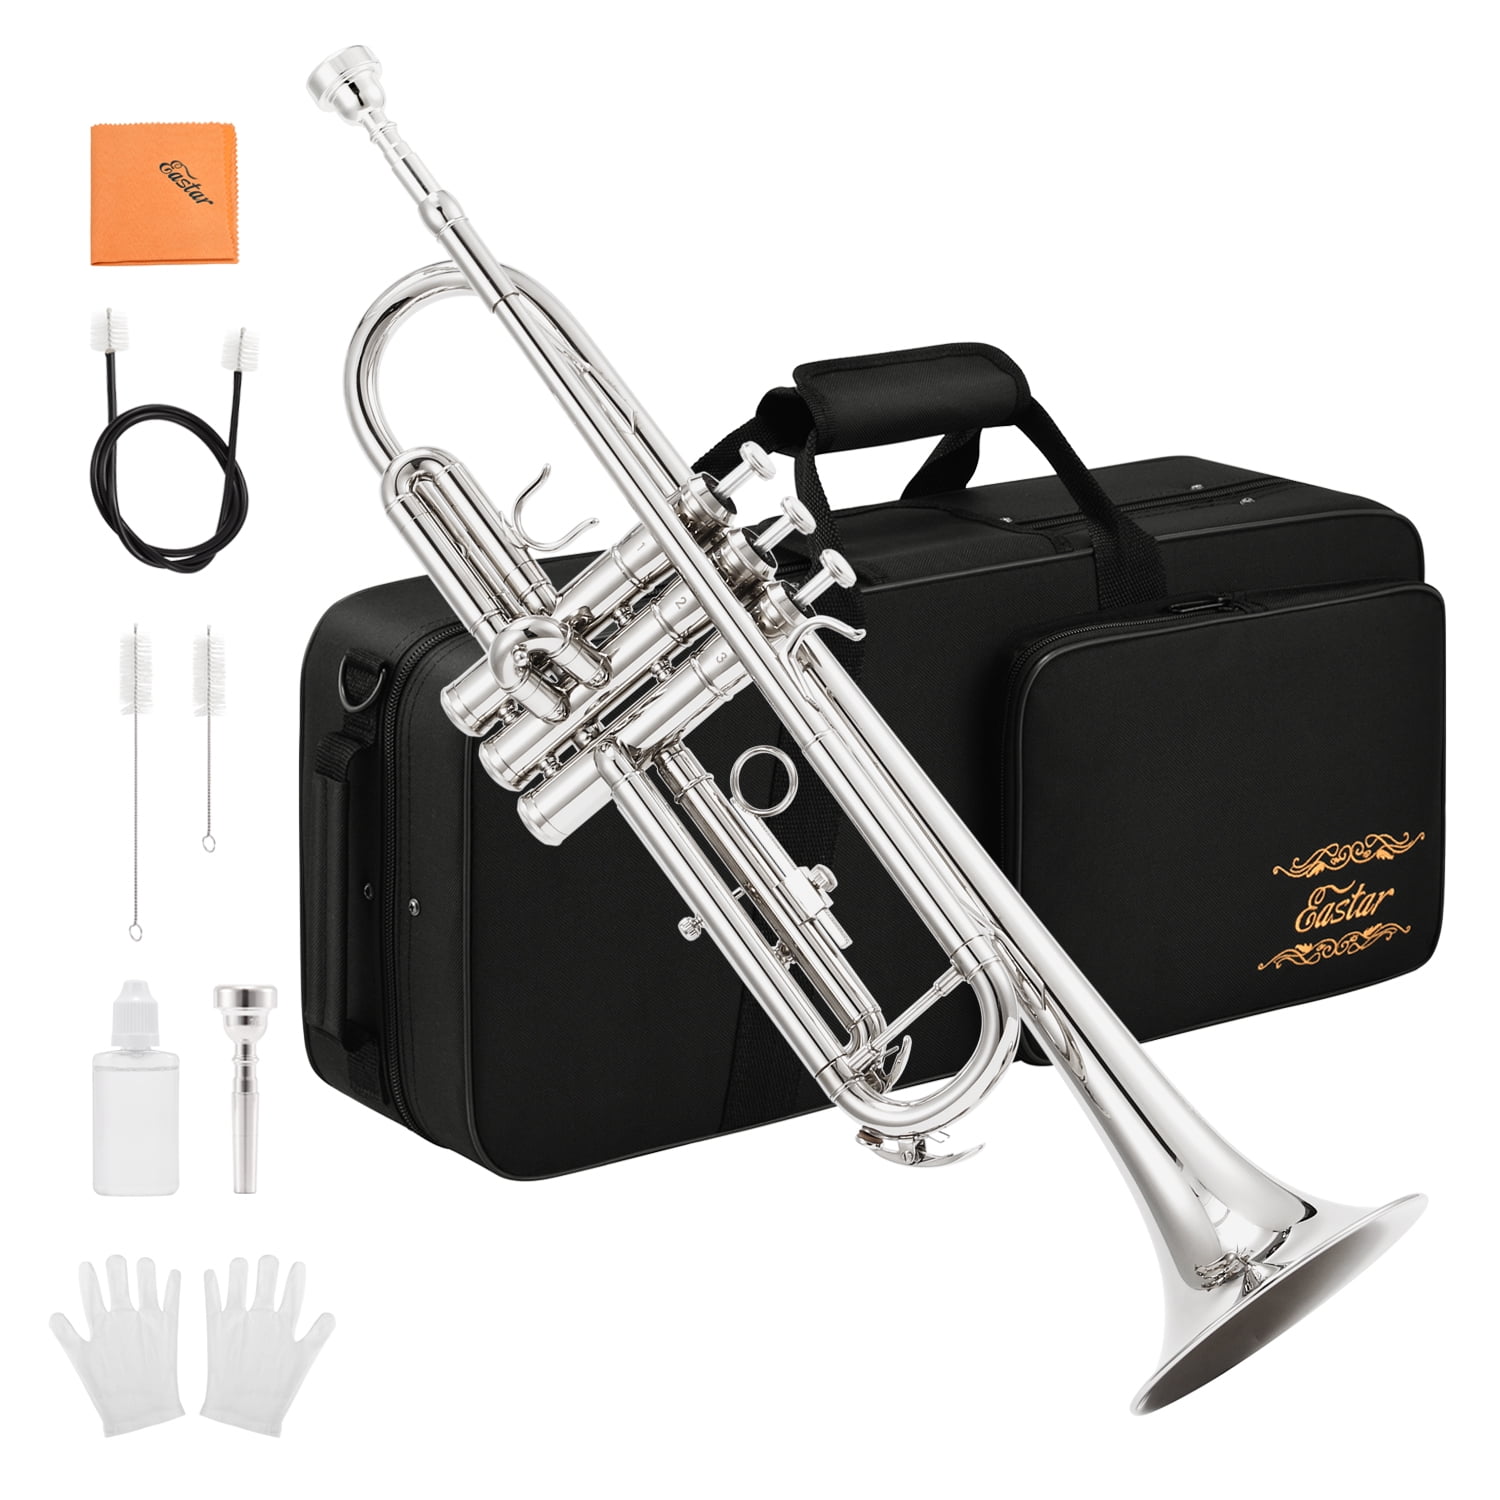 Mowind Trumpet B flat Standard Student Bb Key Brass Gold Lacquer Trumpet with Hard Case 7C Mouthpiece Cleaning Kit Set 